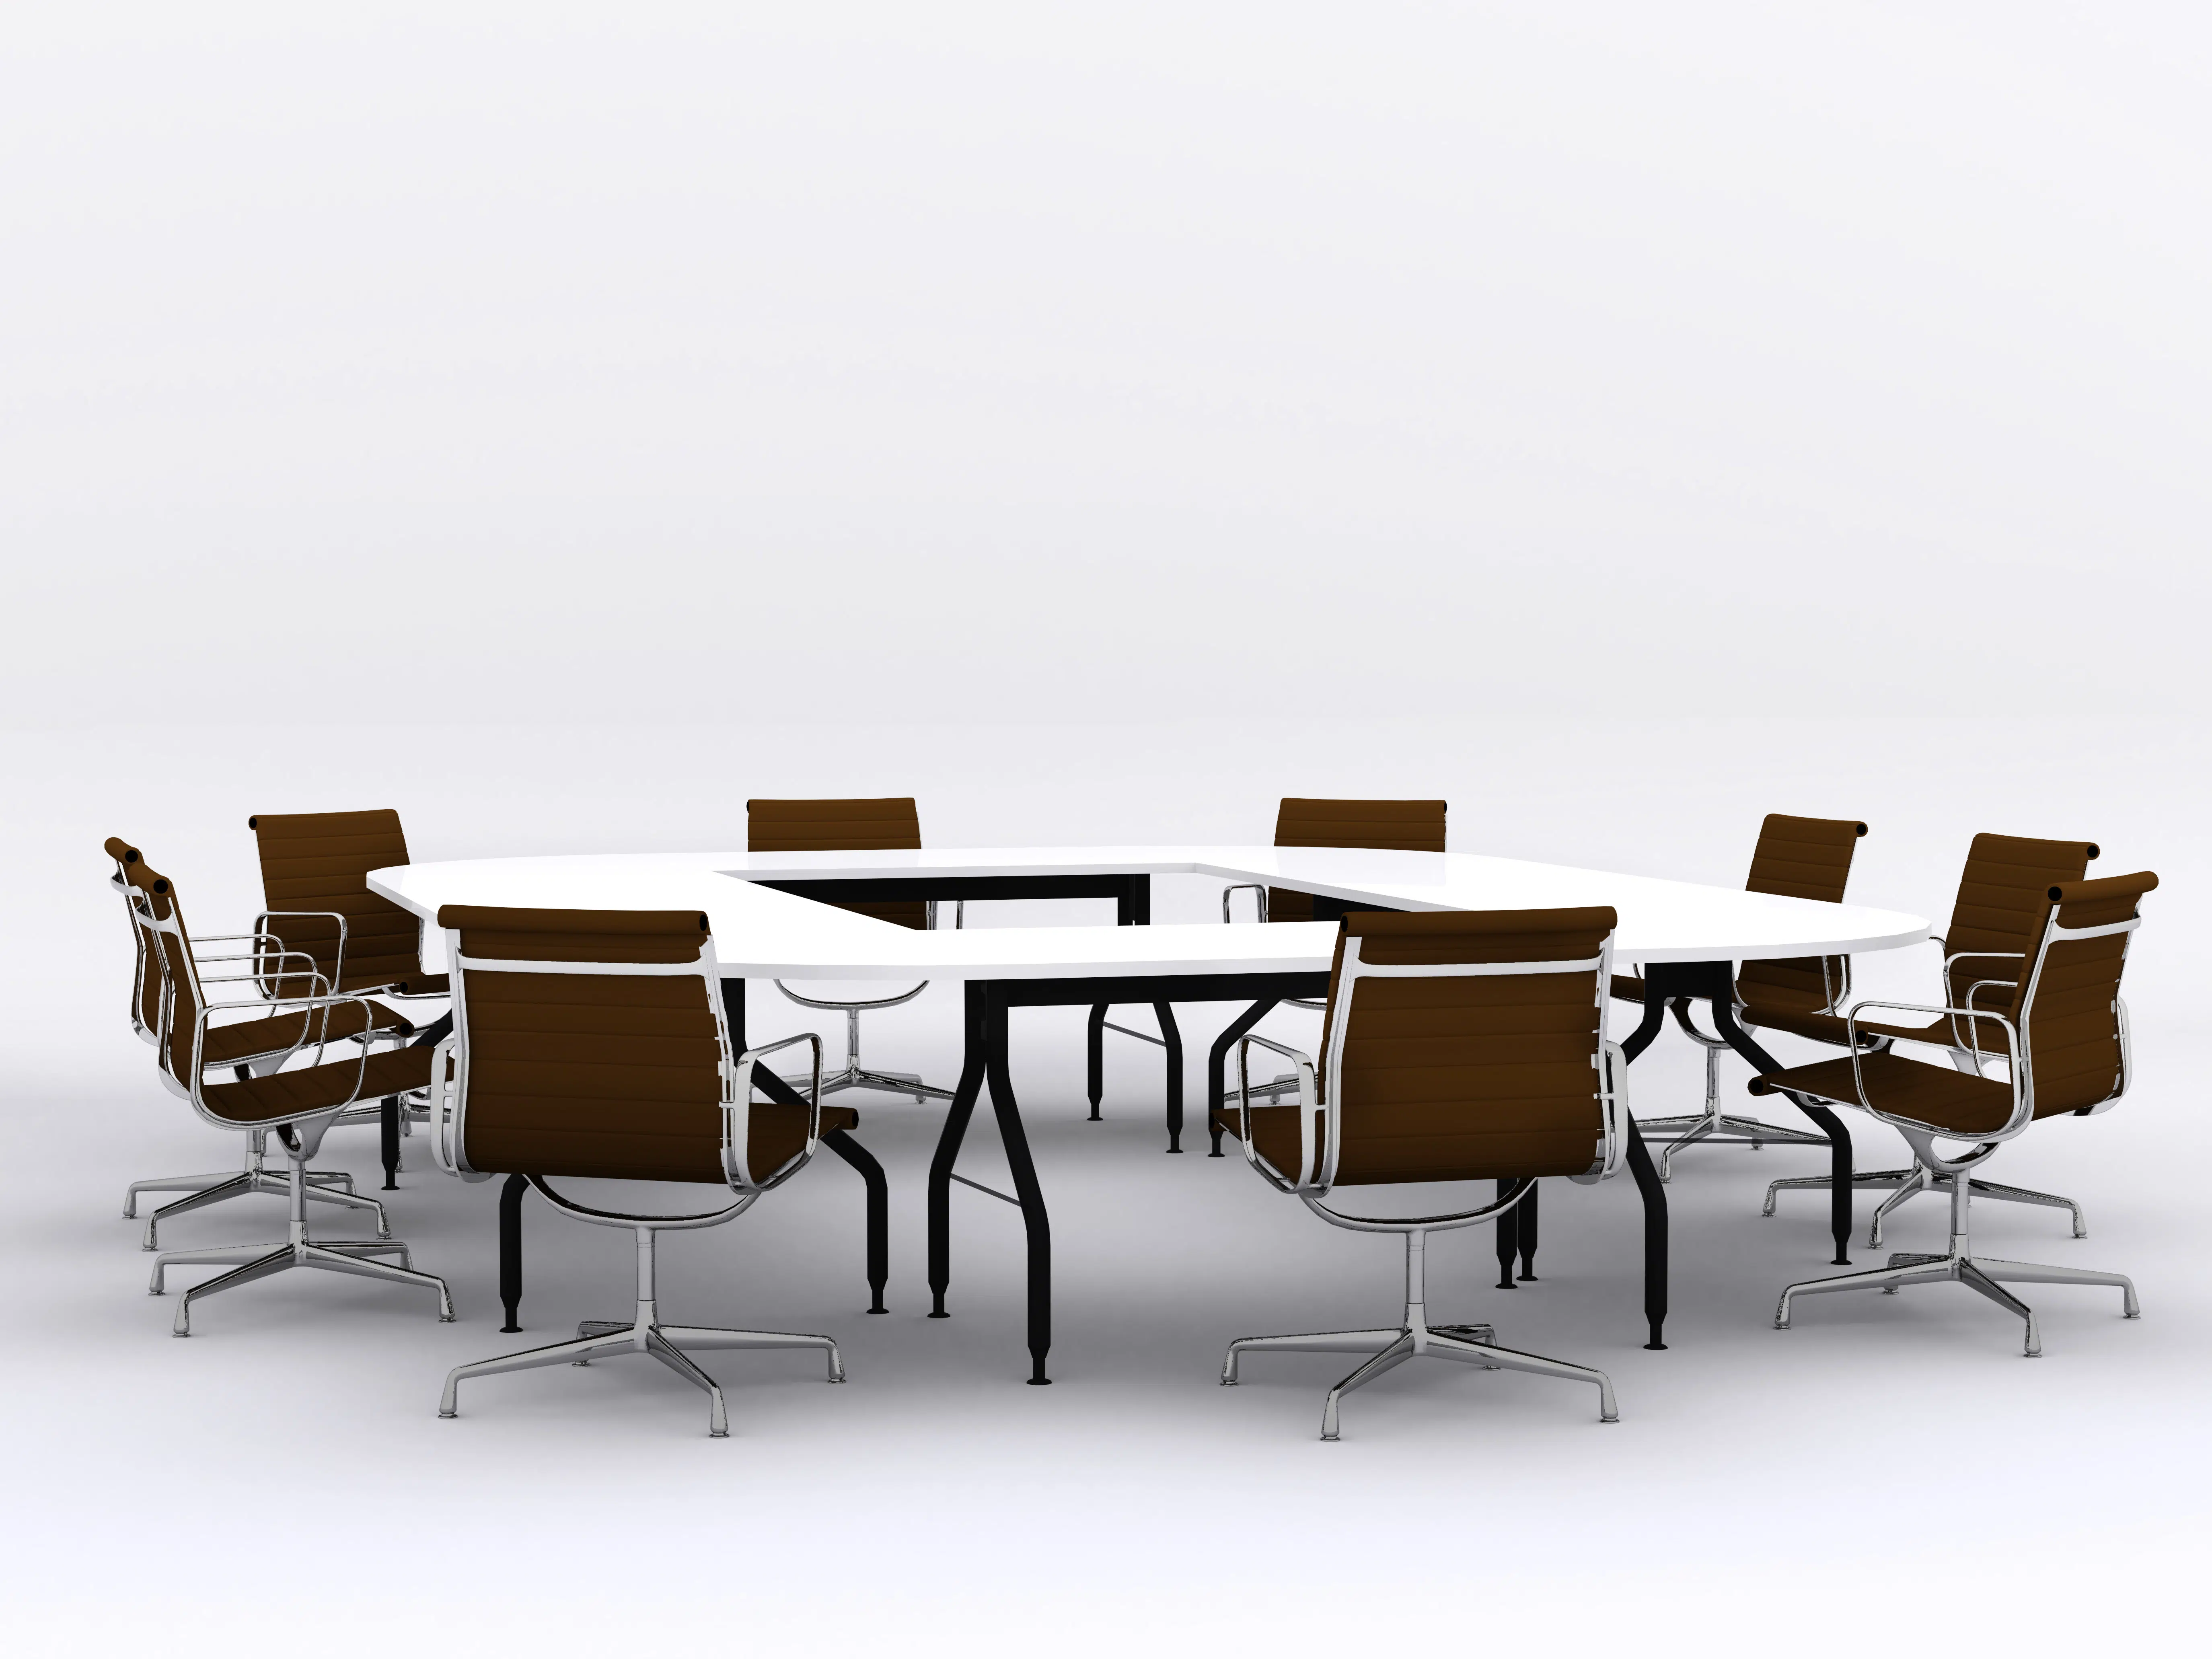 Render of collaborative Conference table built with employee engagement in-mind